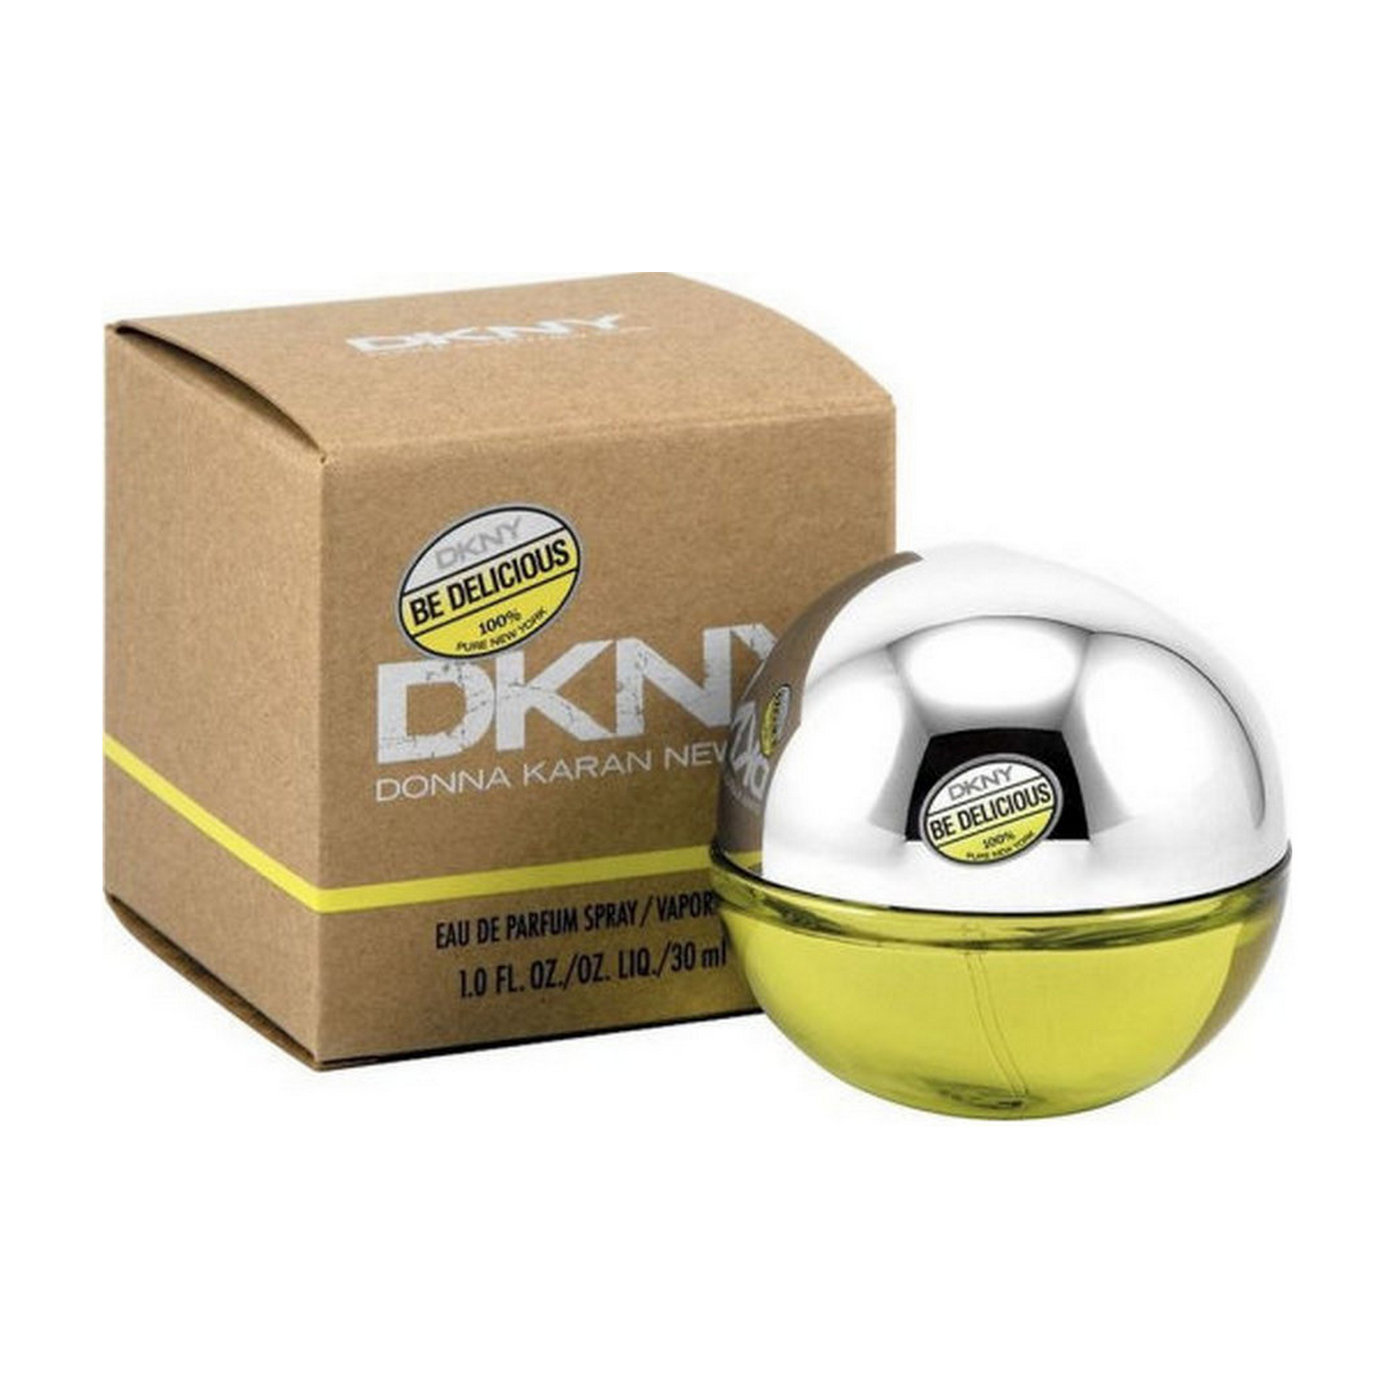 Donna karan dkny be delicious. DKNY be delicious 30 мл. Donna Karan DKNY be delicious, EDP, 100 ml. DKNY be delicious парфюмерная вода 30. Donna Karan DKNY be delicious for women.